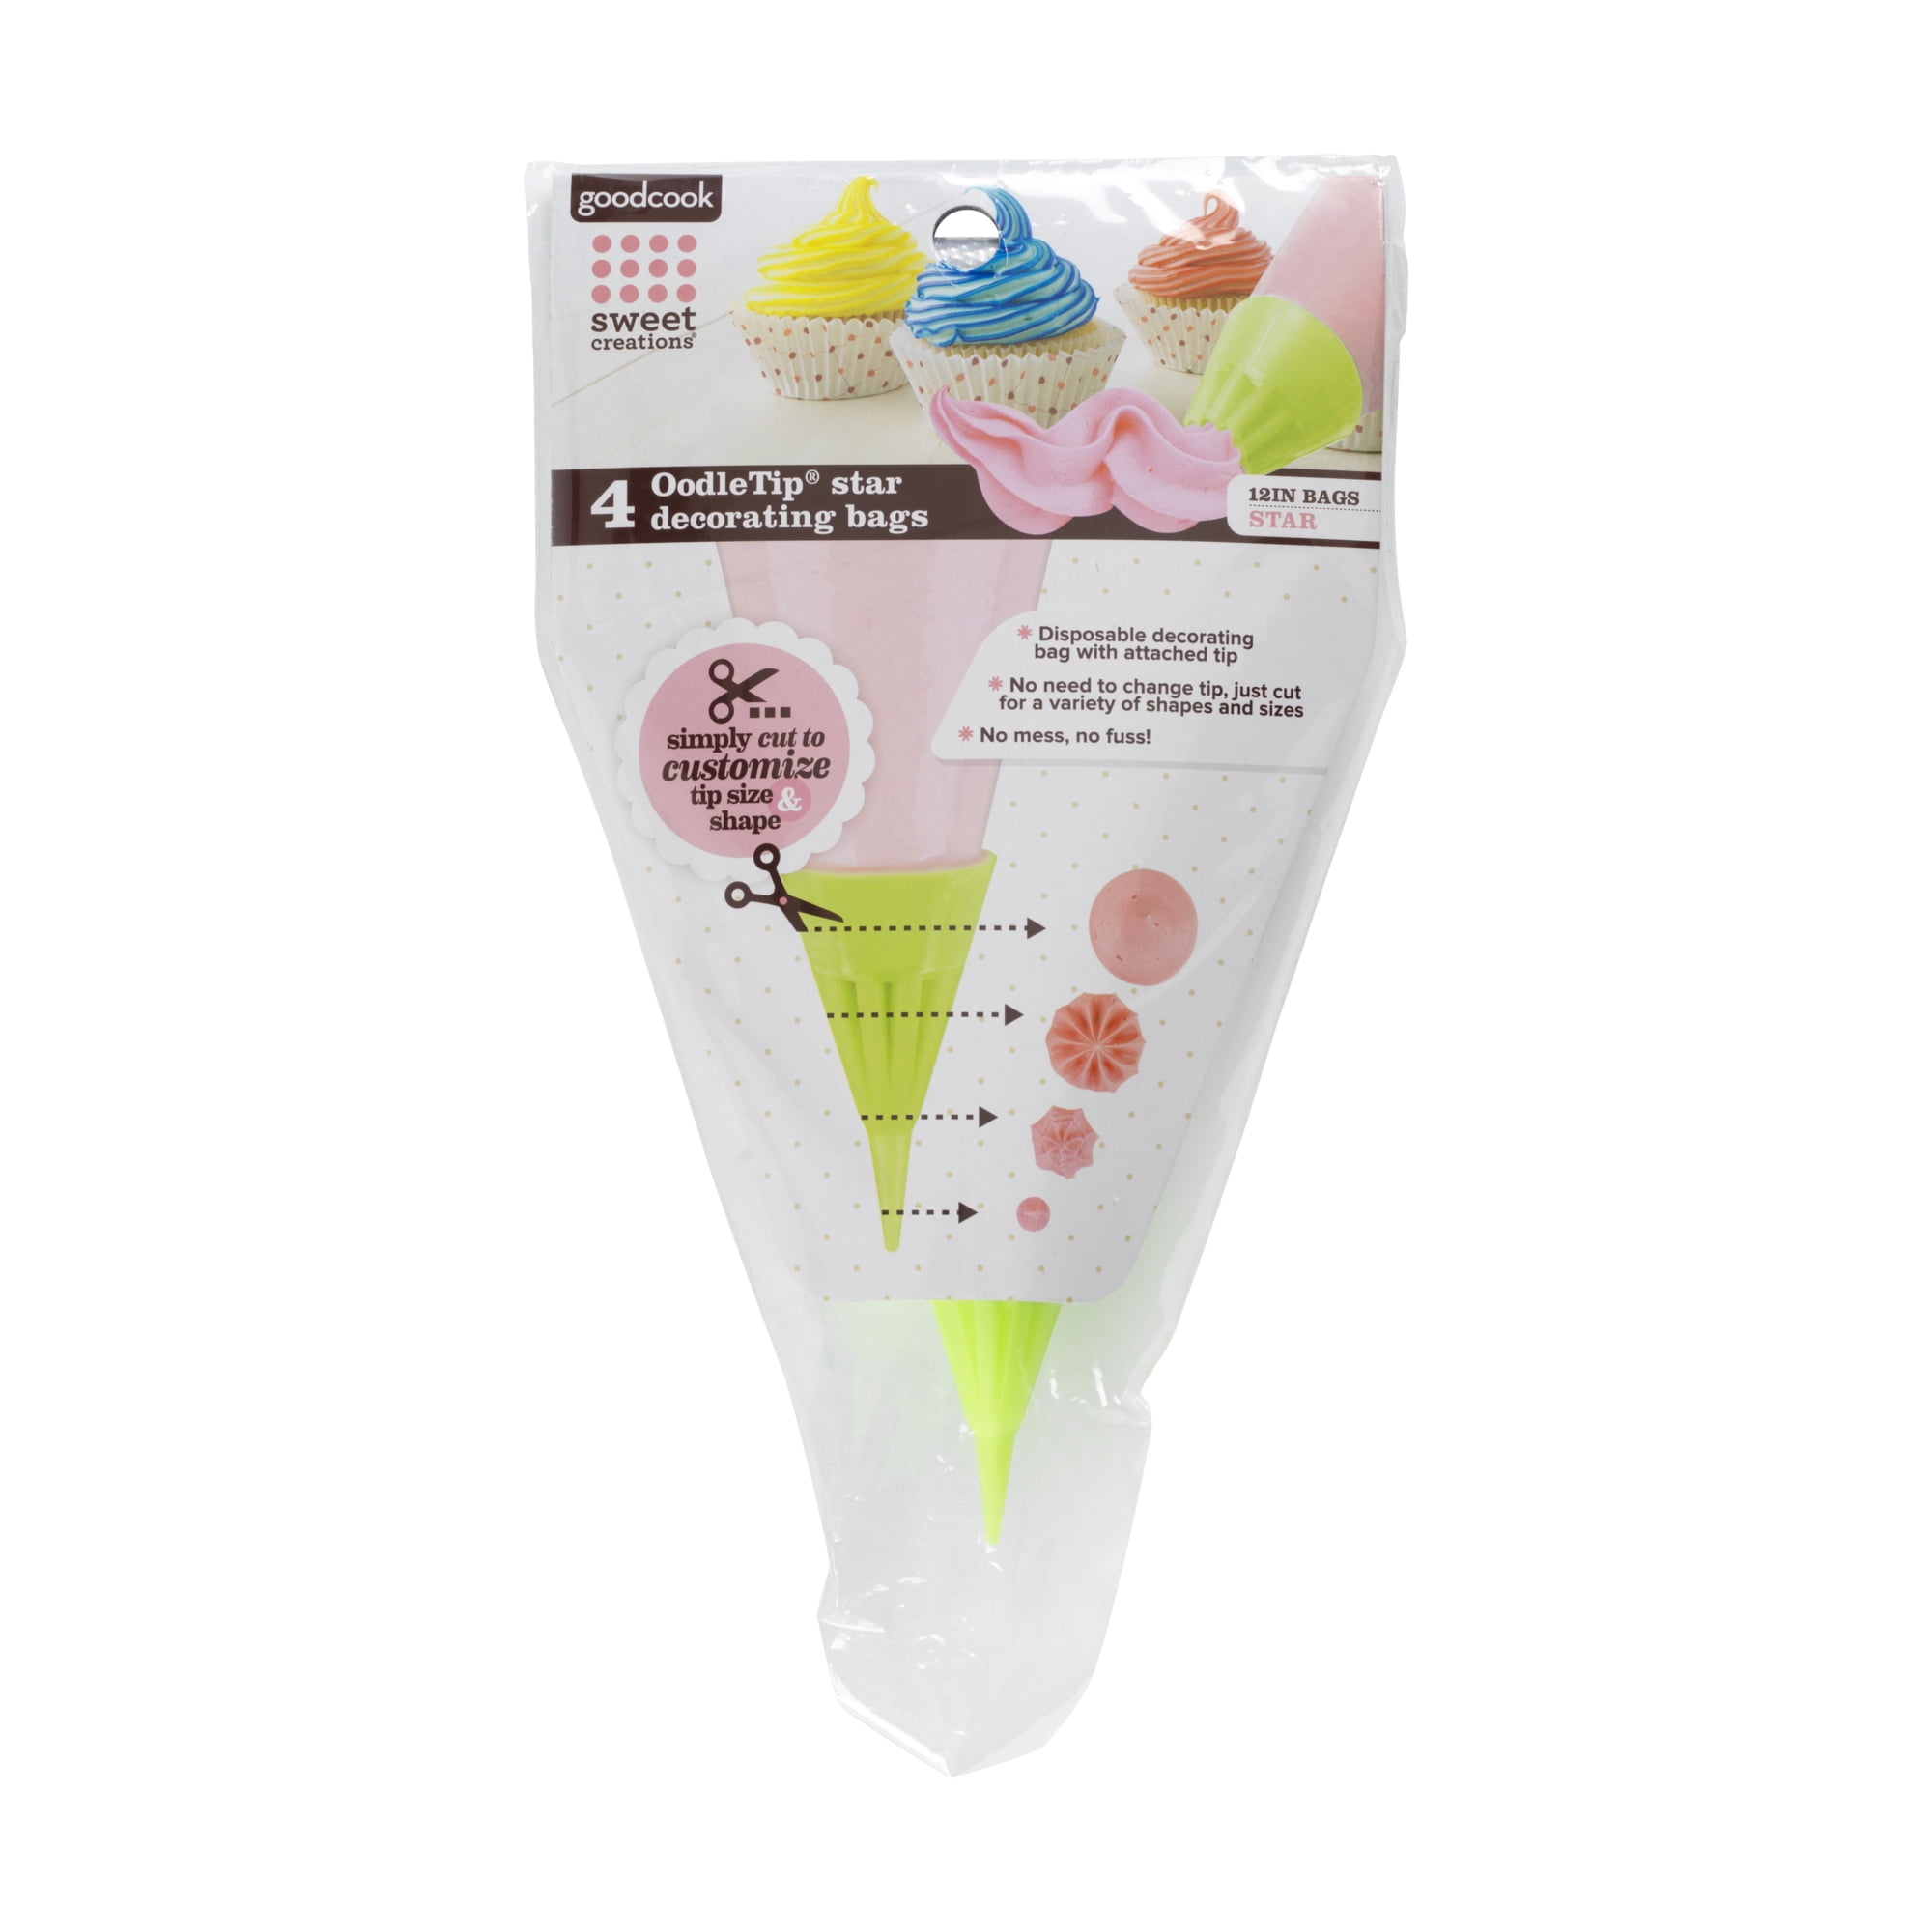 GoodCook Sweet Creations 4-Piece 12" OodleTip Star Decorating Bags Set, Clear/Green